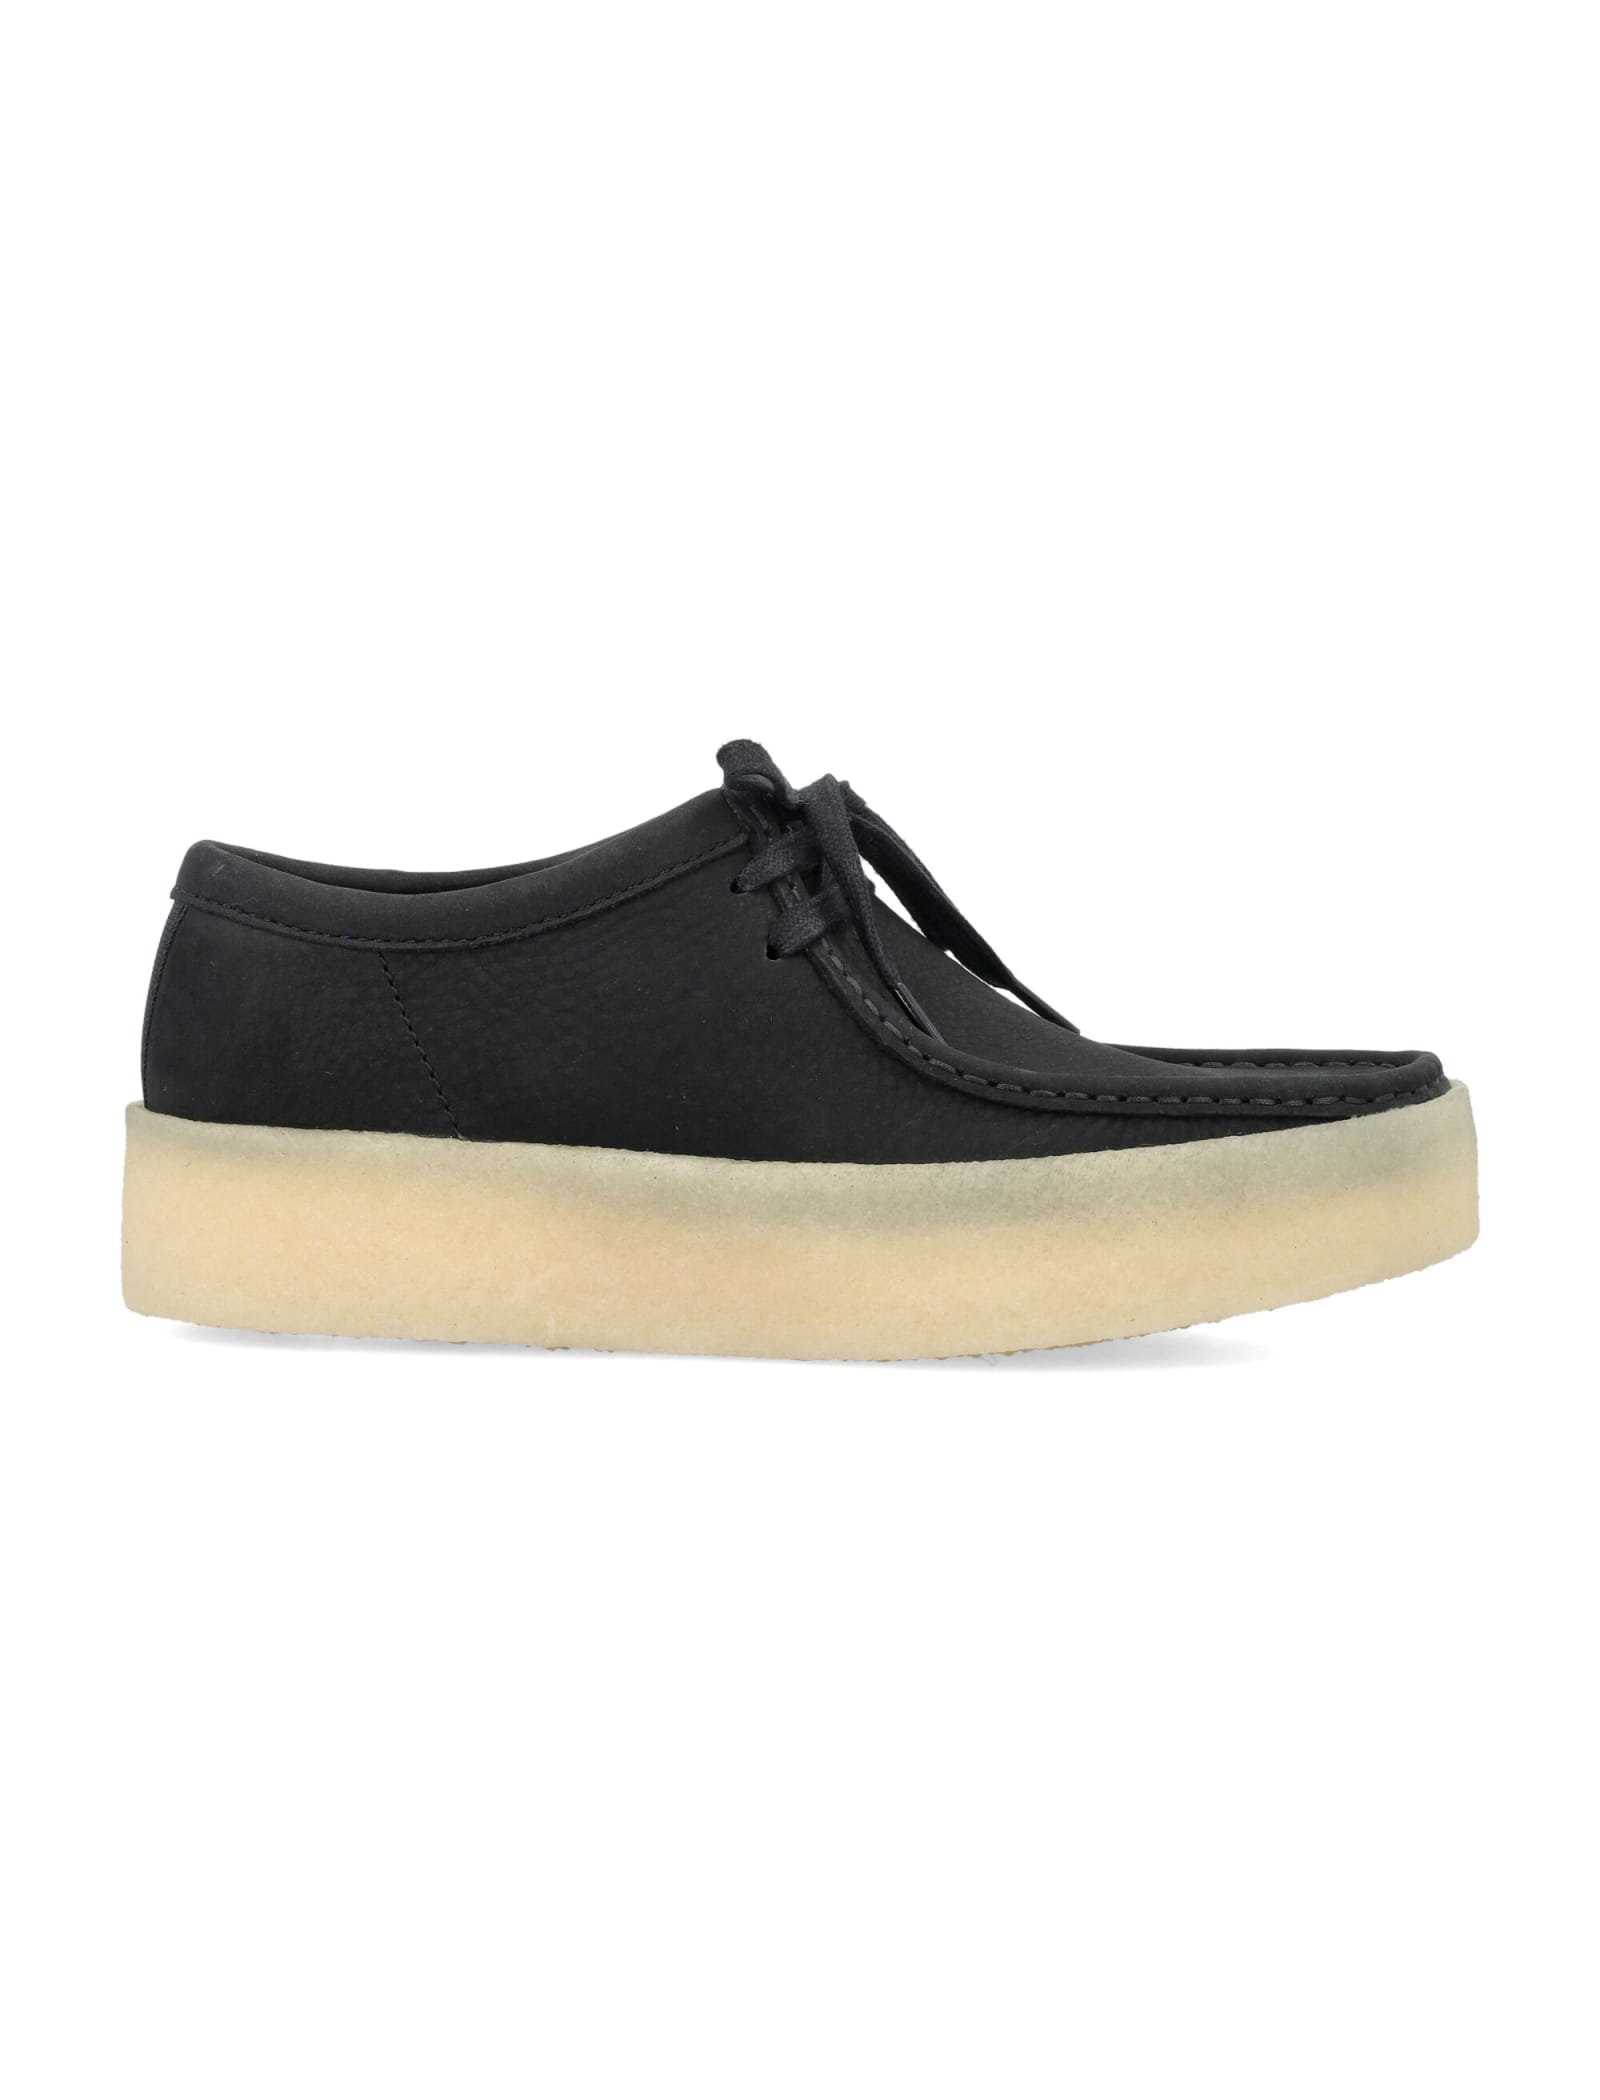 CLARKS WALLABEE CUP